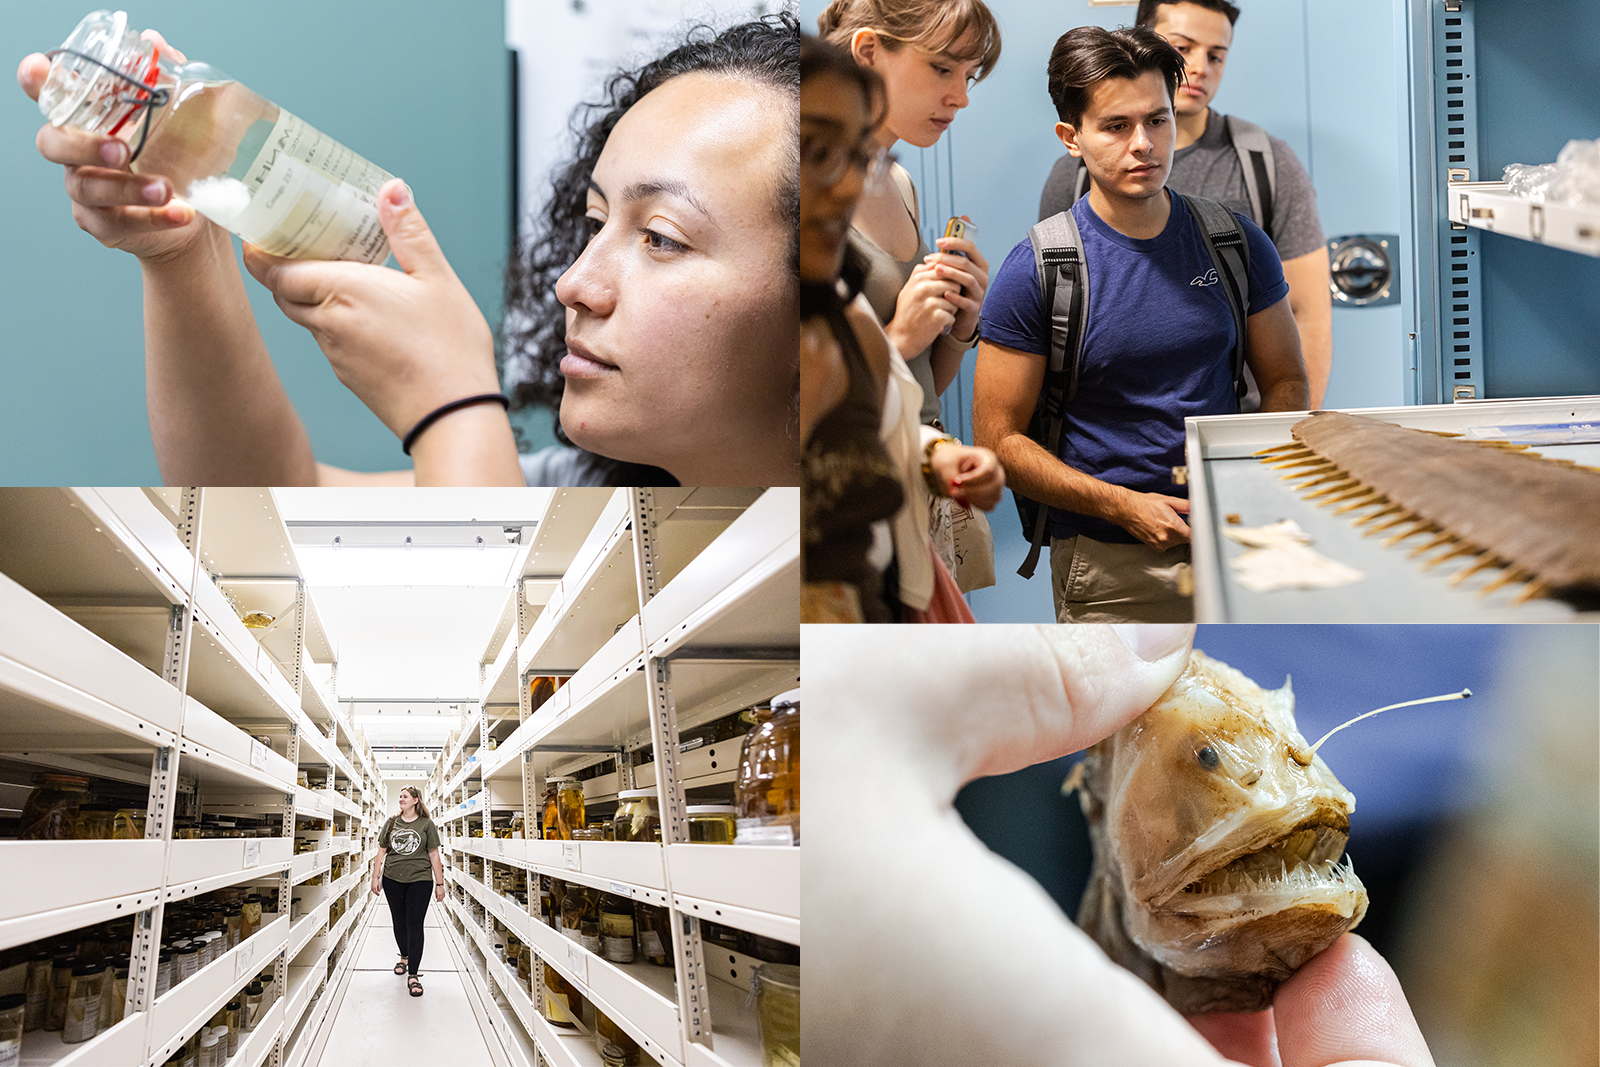 Four images; Top right, a student holds up and examines a fish specimen in a glass jar; Bottom right, a student walks through a show of shelves of the Field Museum's fish collection; Top right, four students look at a flat fish specimen with spikes on display on a tray; Bottom right, a hand holds a small angler fish